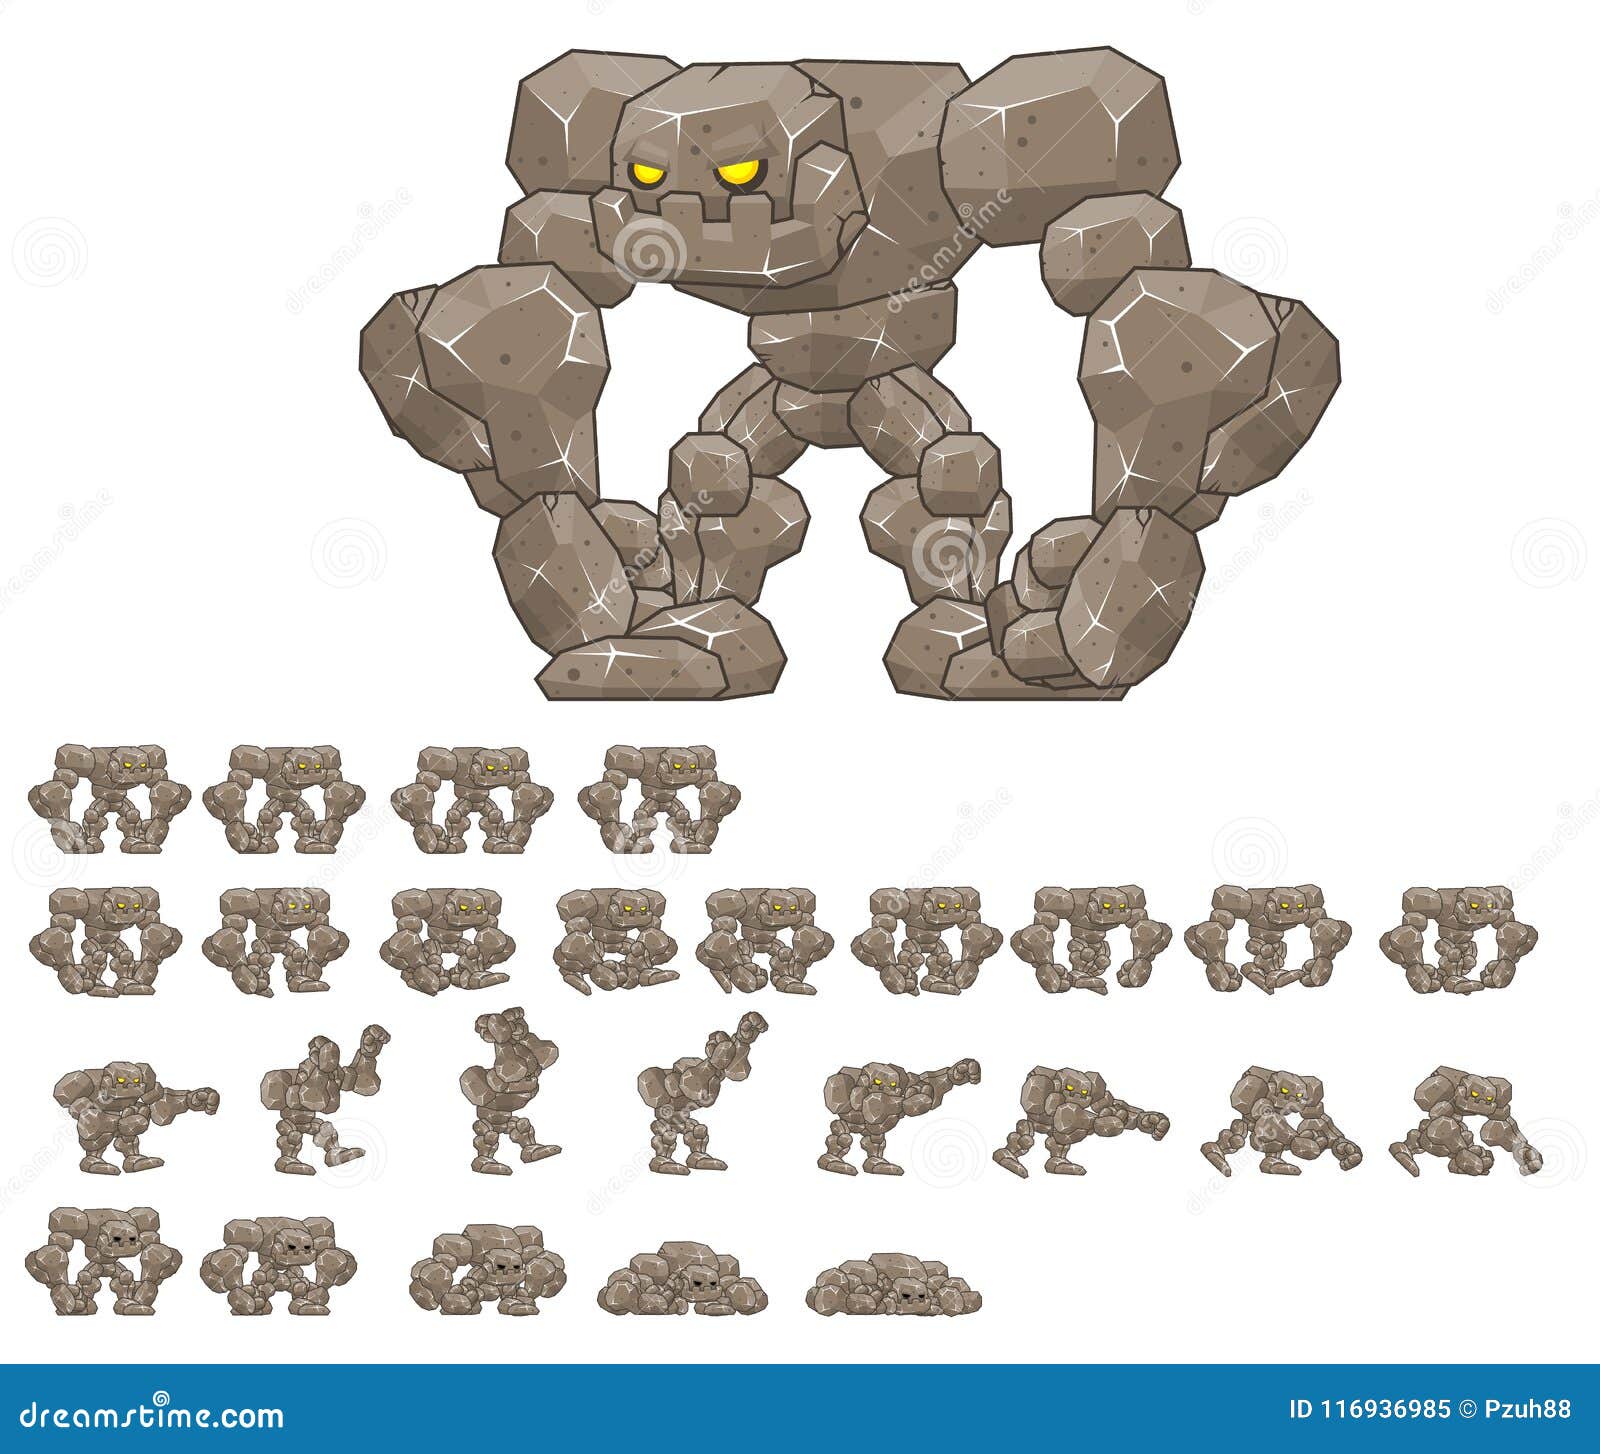 Animated Big Golem Character Sprites Stock Vector - Illustration of pebble,  html5: 116936985